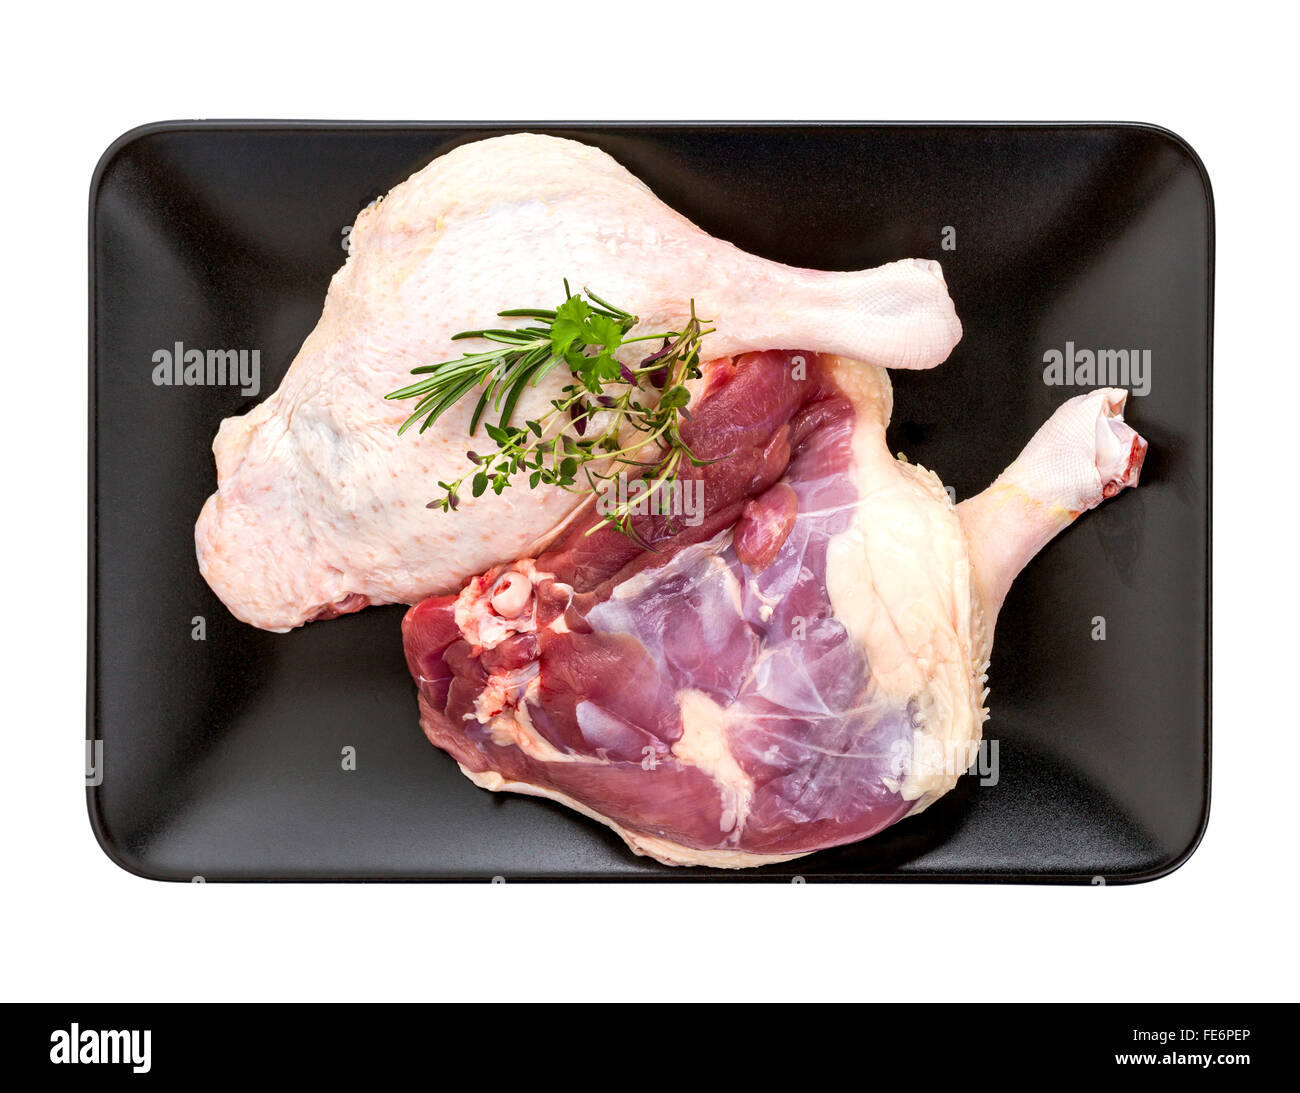 Two Muscovy duck leg with herb on black plate, top view Stock Photo